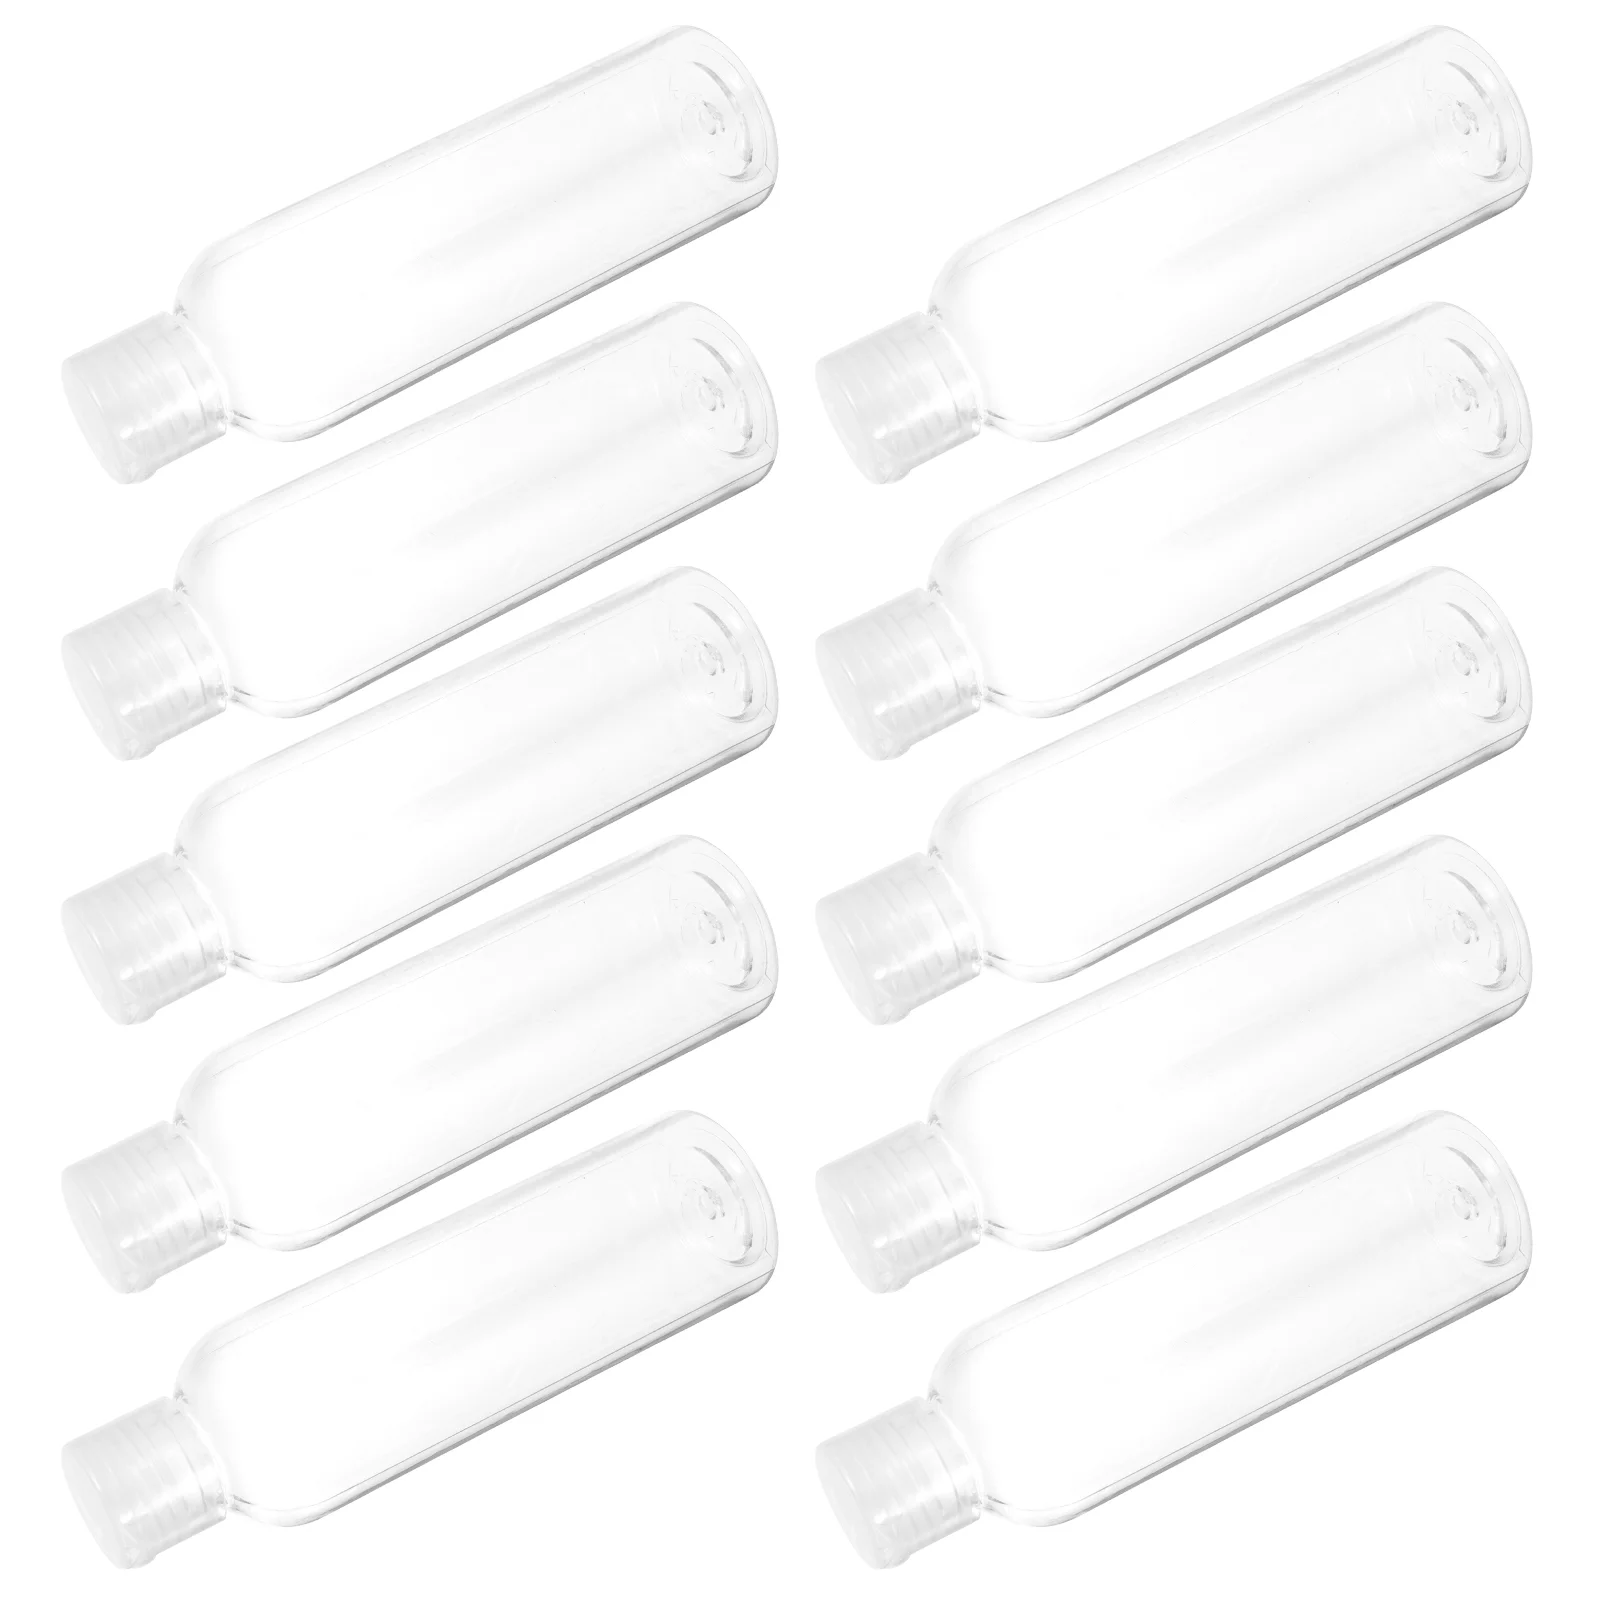 

10 Pcs Plastic Container Squeeze Bottle Travel Bottles Filling Lotion Refillable Containers Toiletries